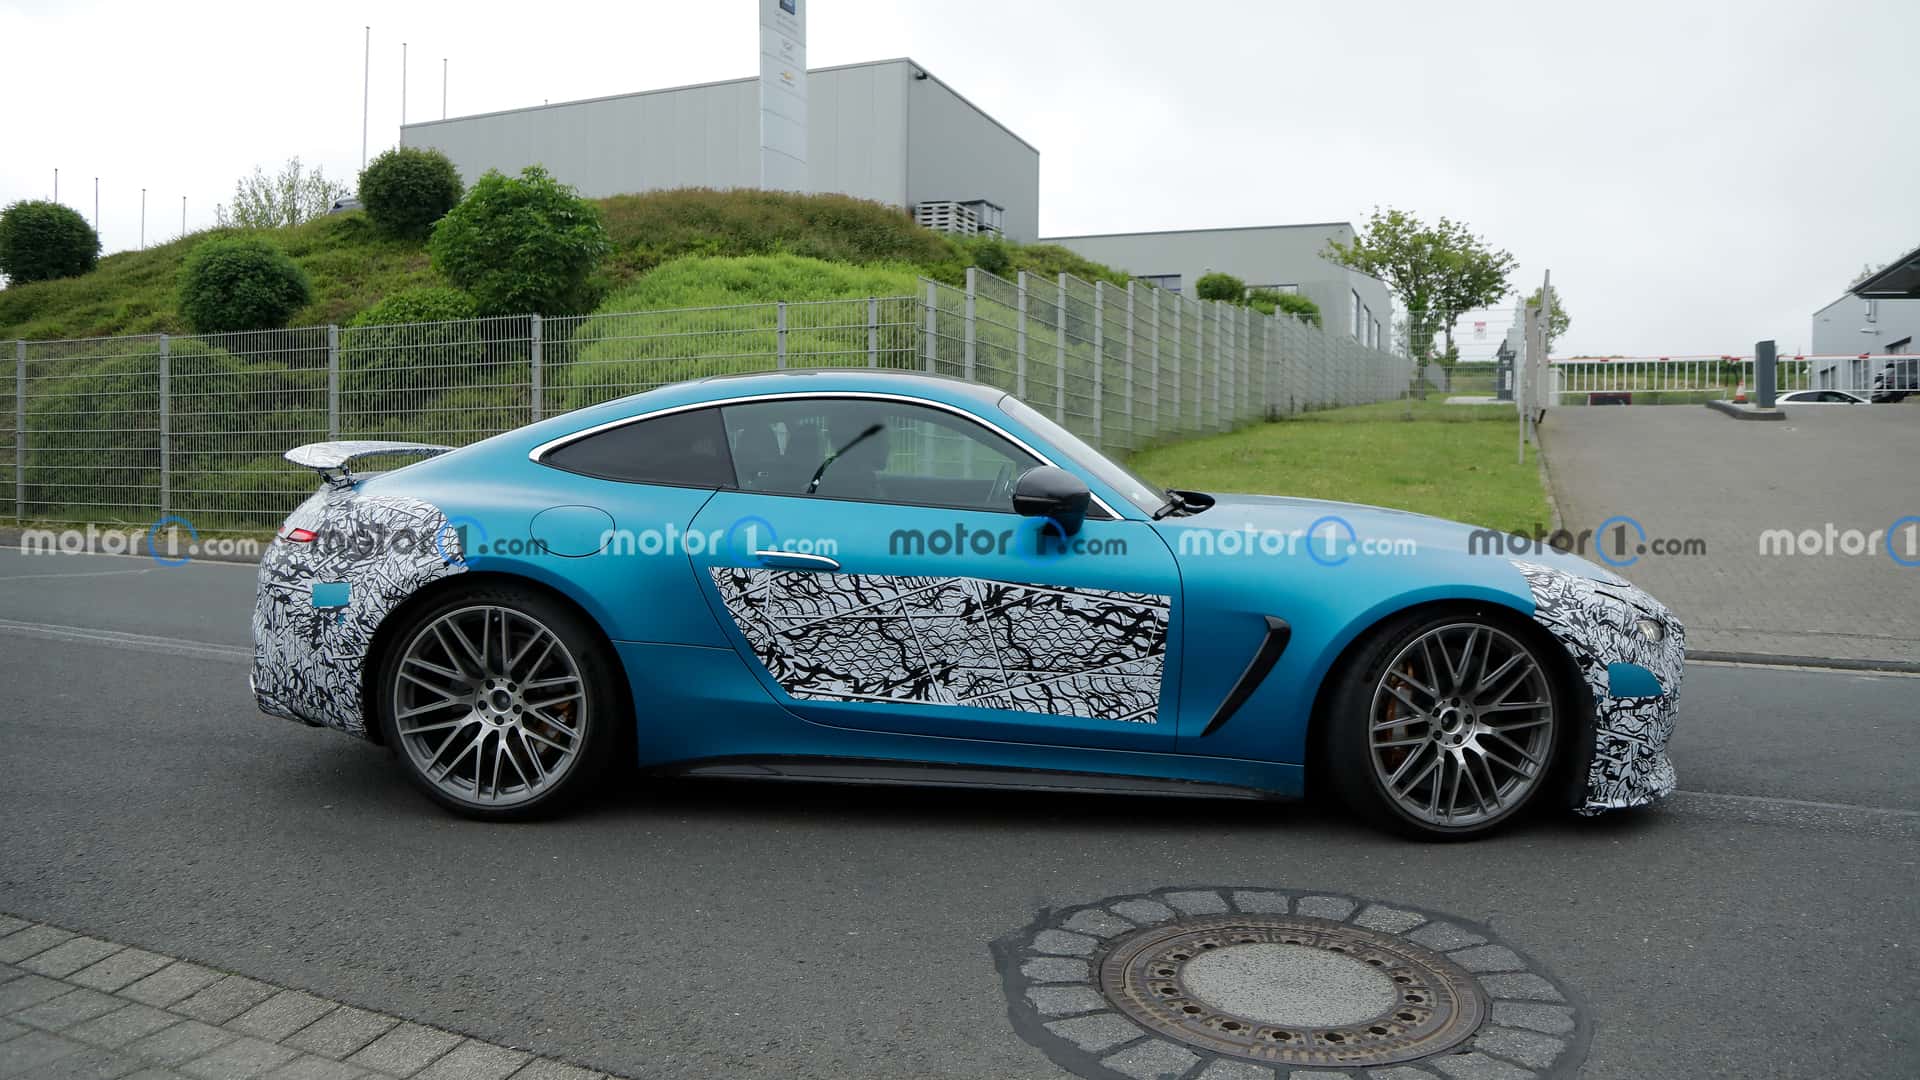 2024-mercedes-amg-gt-coupe-side-view-spy-photo.jpg